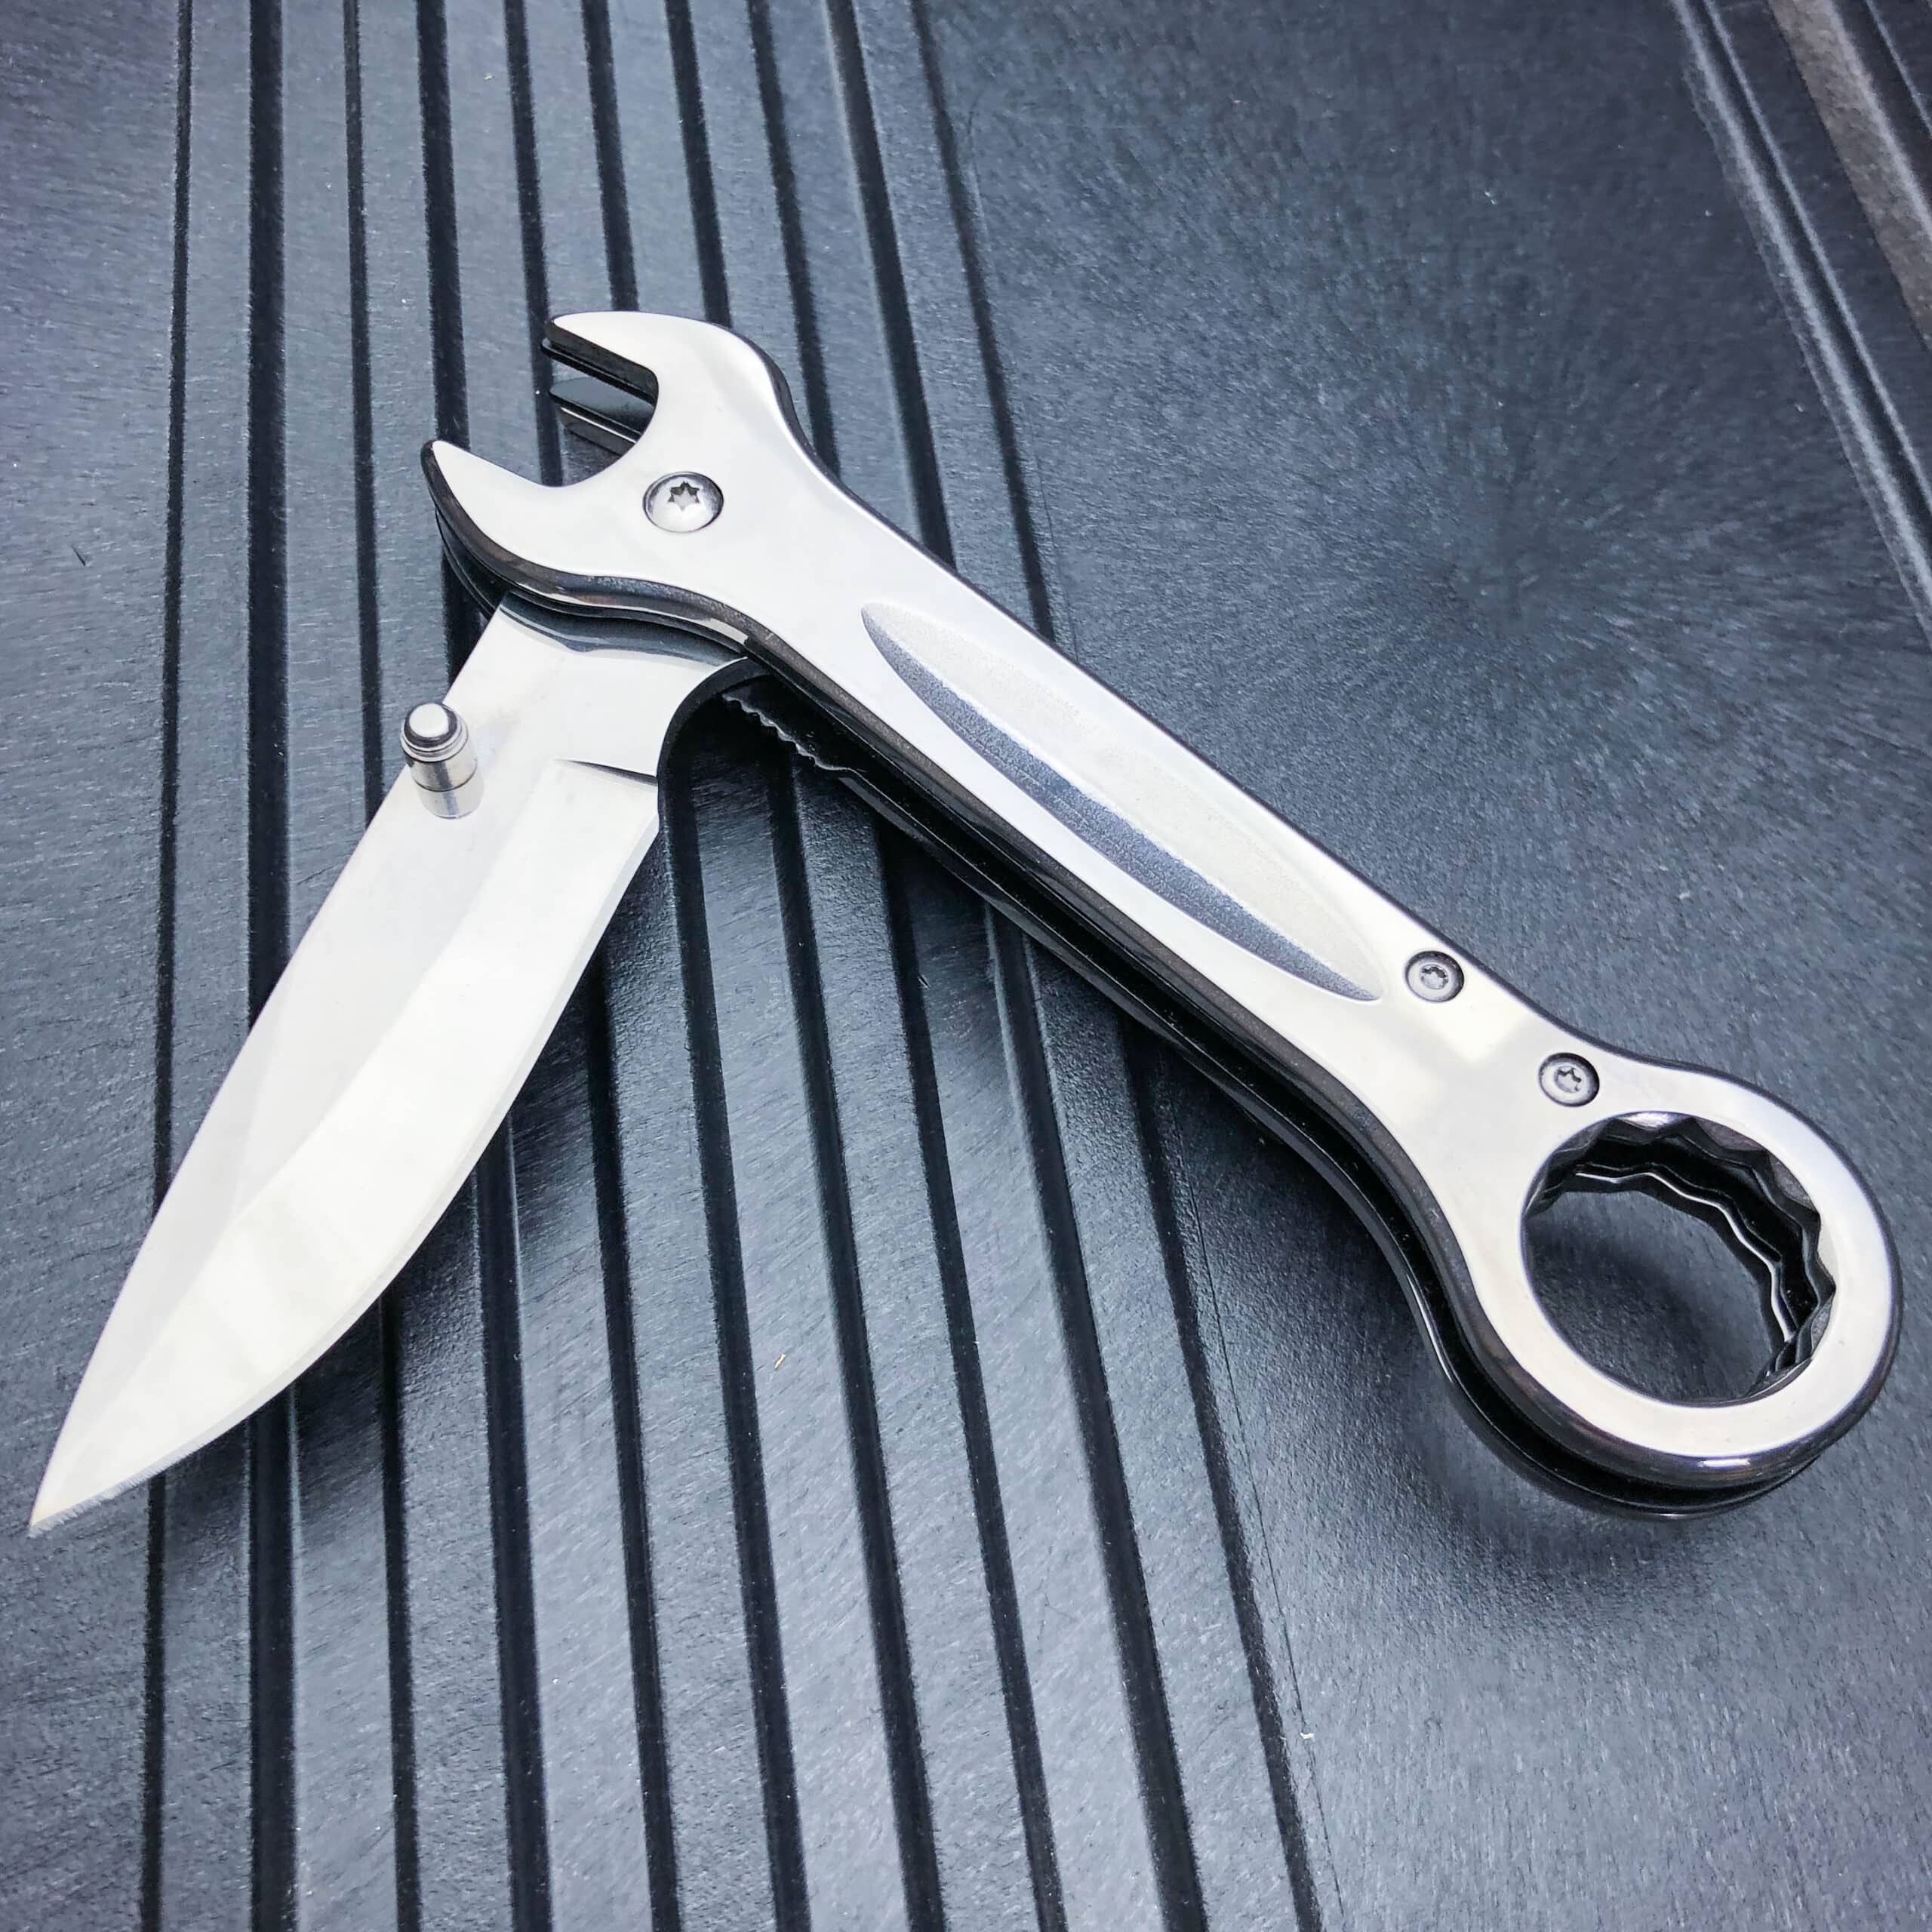 7.5" MULTI-TOOL WRENCH POCKET KNIFE TACTICAL SPRING ASSISTED OPEN FOLDING CHROME